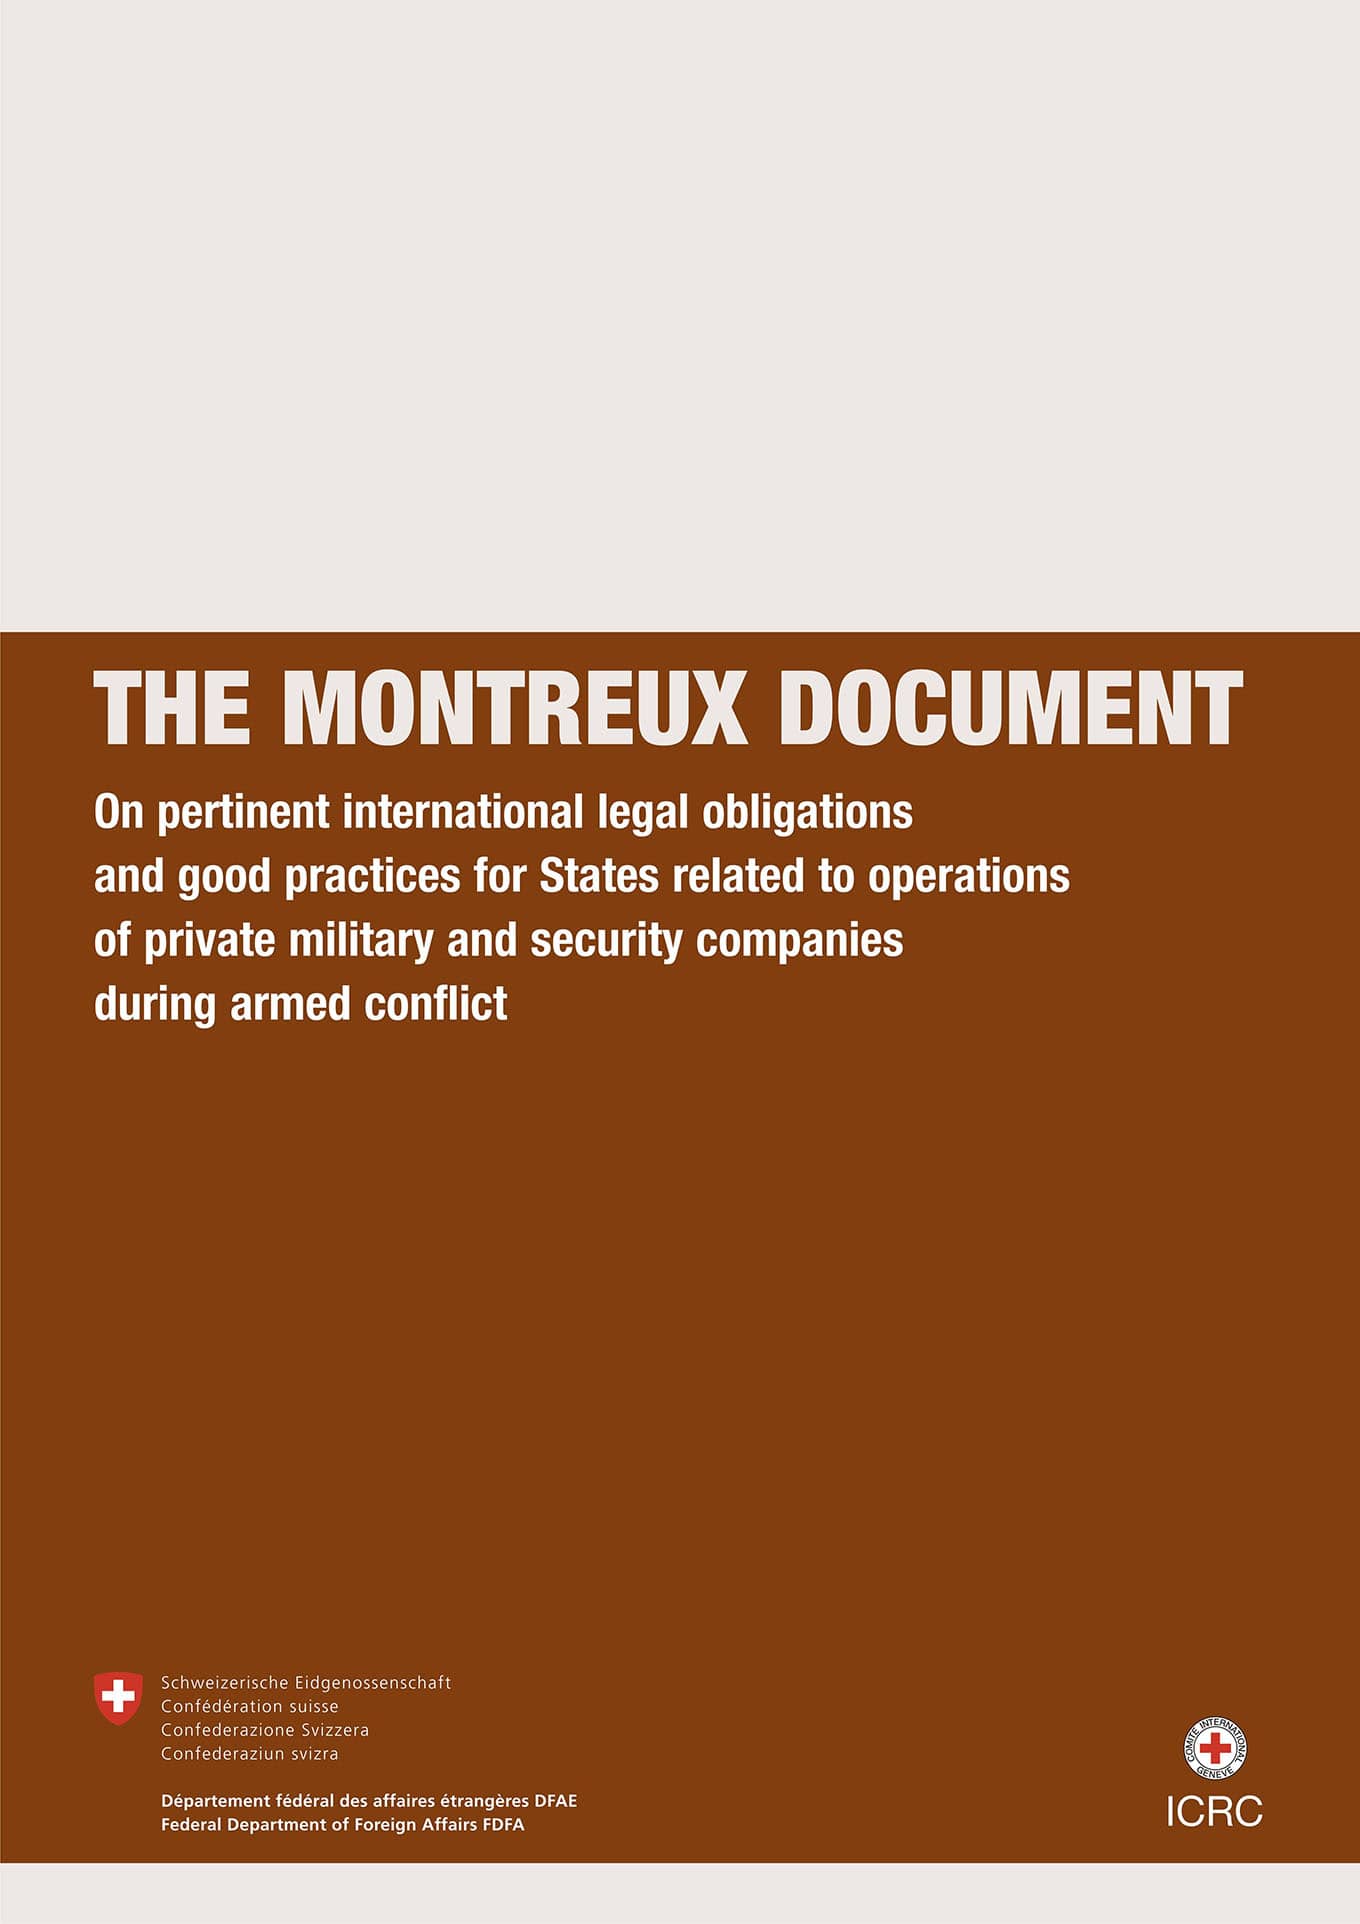 The Montreux Document on Pertinent International Legal Obligations and Good Practices for States Related to Operations on Private Military and Security Companies During Armed Conflict (2008)